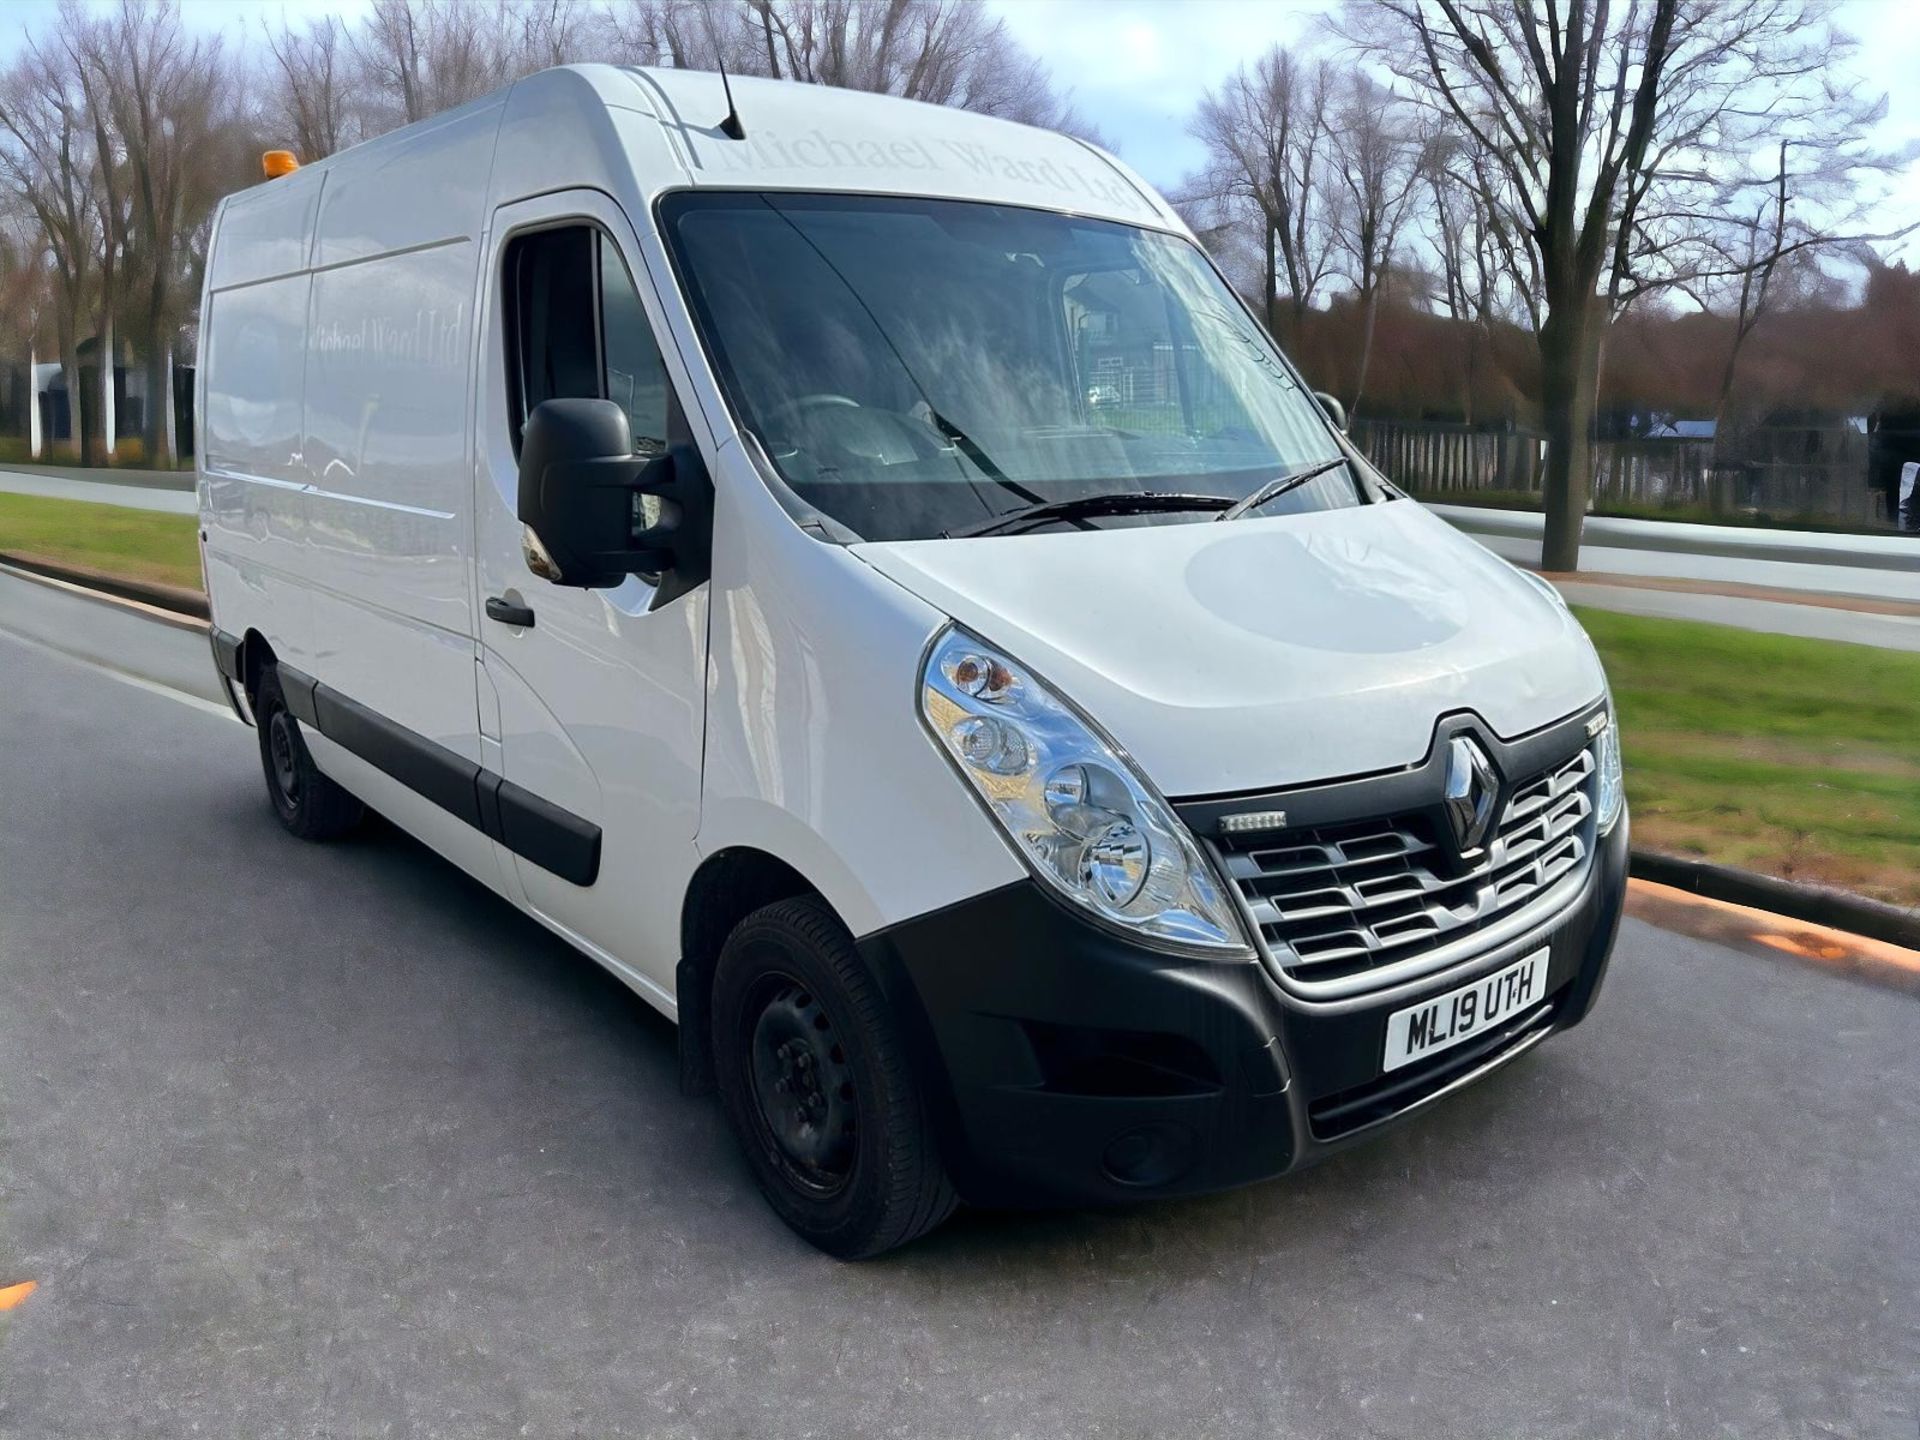 2019-19 REG RENAULT MASTER DCI MWB35 L2H2 -HPI CLEAR - READY FOR WORK! - Image 2 of 14